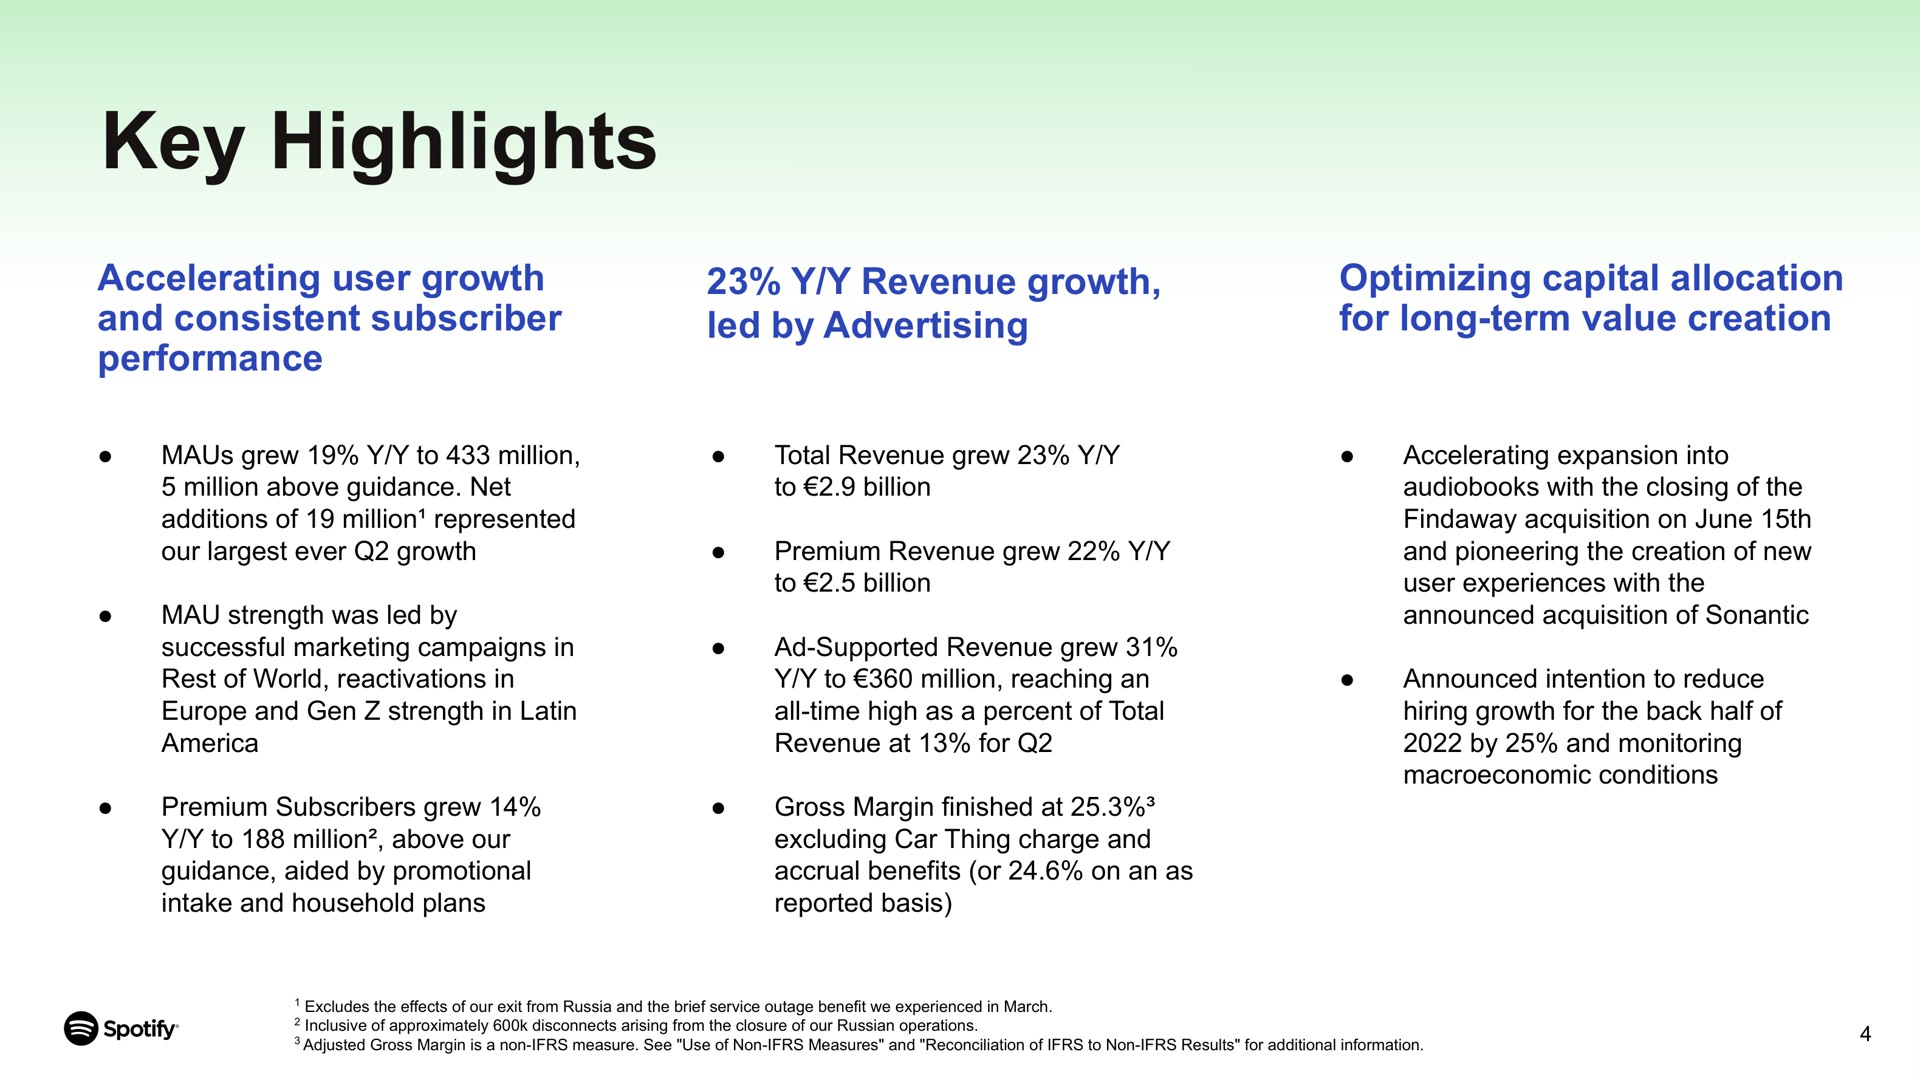 key highlights accelerating user growth and consistent subscriber performance revenue growth led by advertising optimizing capital allocation for long term value creation | Spotify